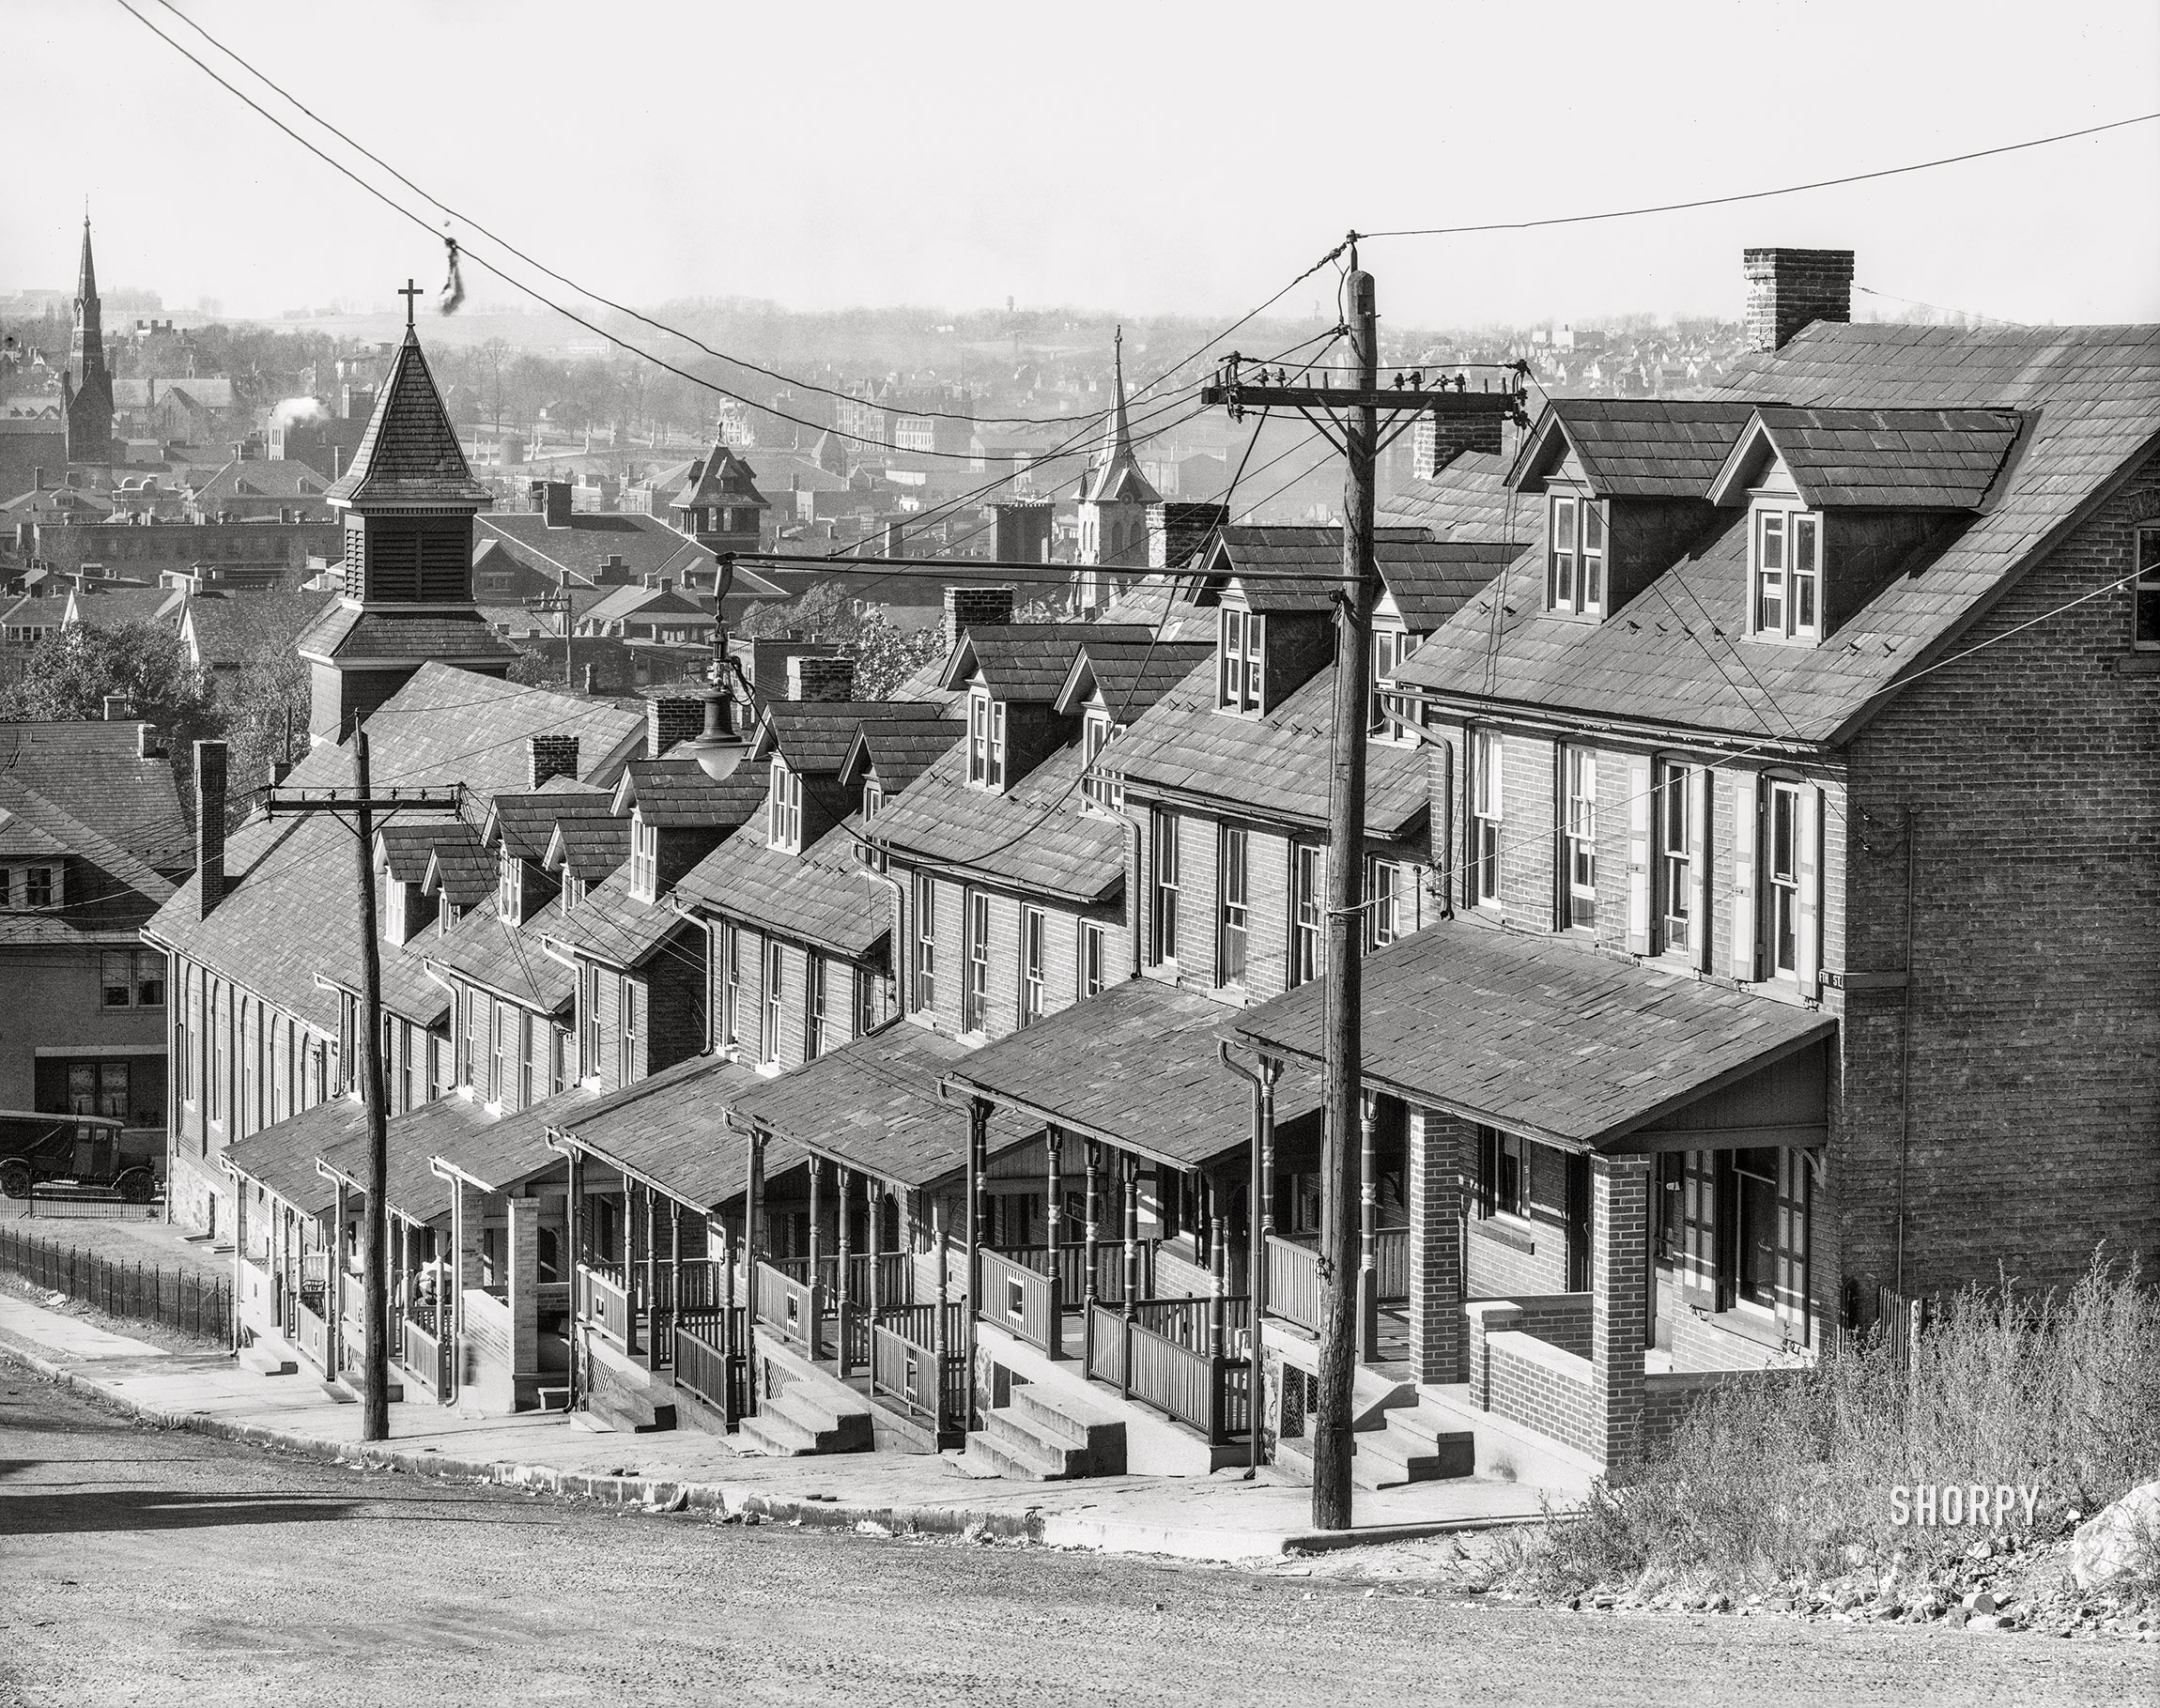 November 1935. "Bethlehem, Pennsylvania. Stepped row of houses on a hillside street." 8x10 inch nitrate negative by Walker Evans for the U.S. Resettlement Administration. View full size.